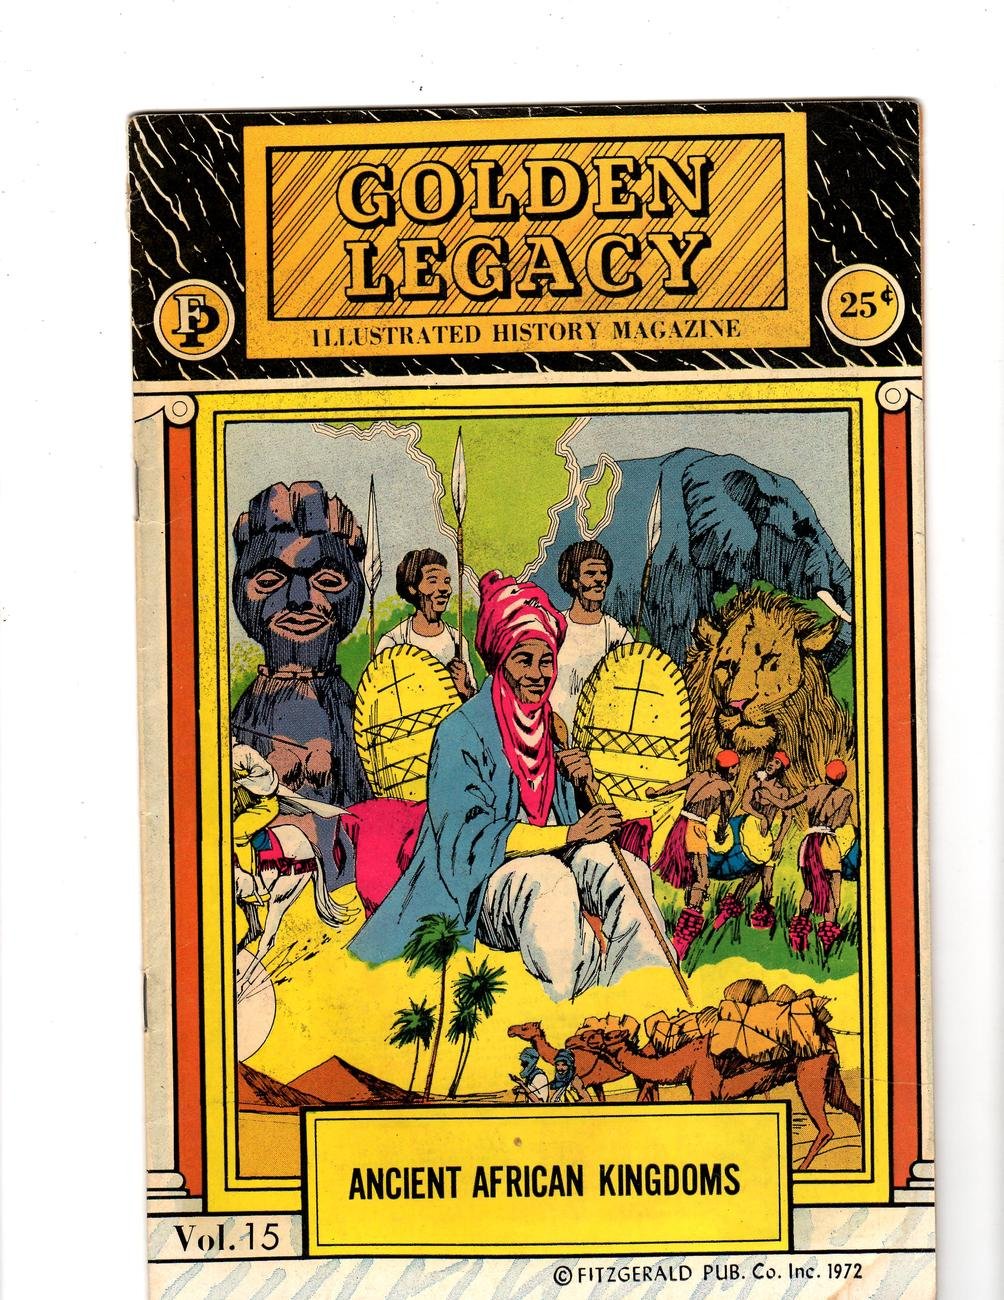 GOLDEN LEGACY ILLUSTRATED HISTORY MAGAZINE, ANCIENT AFRICAN KINGDOMS